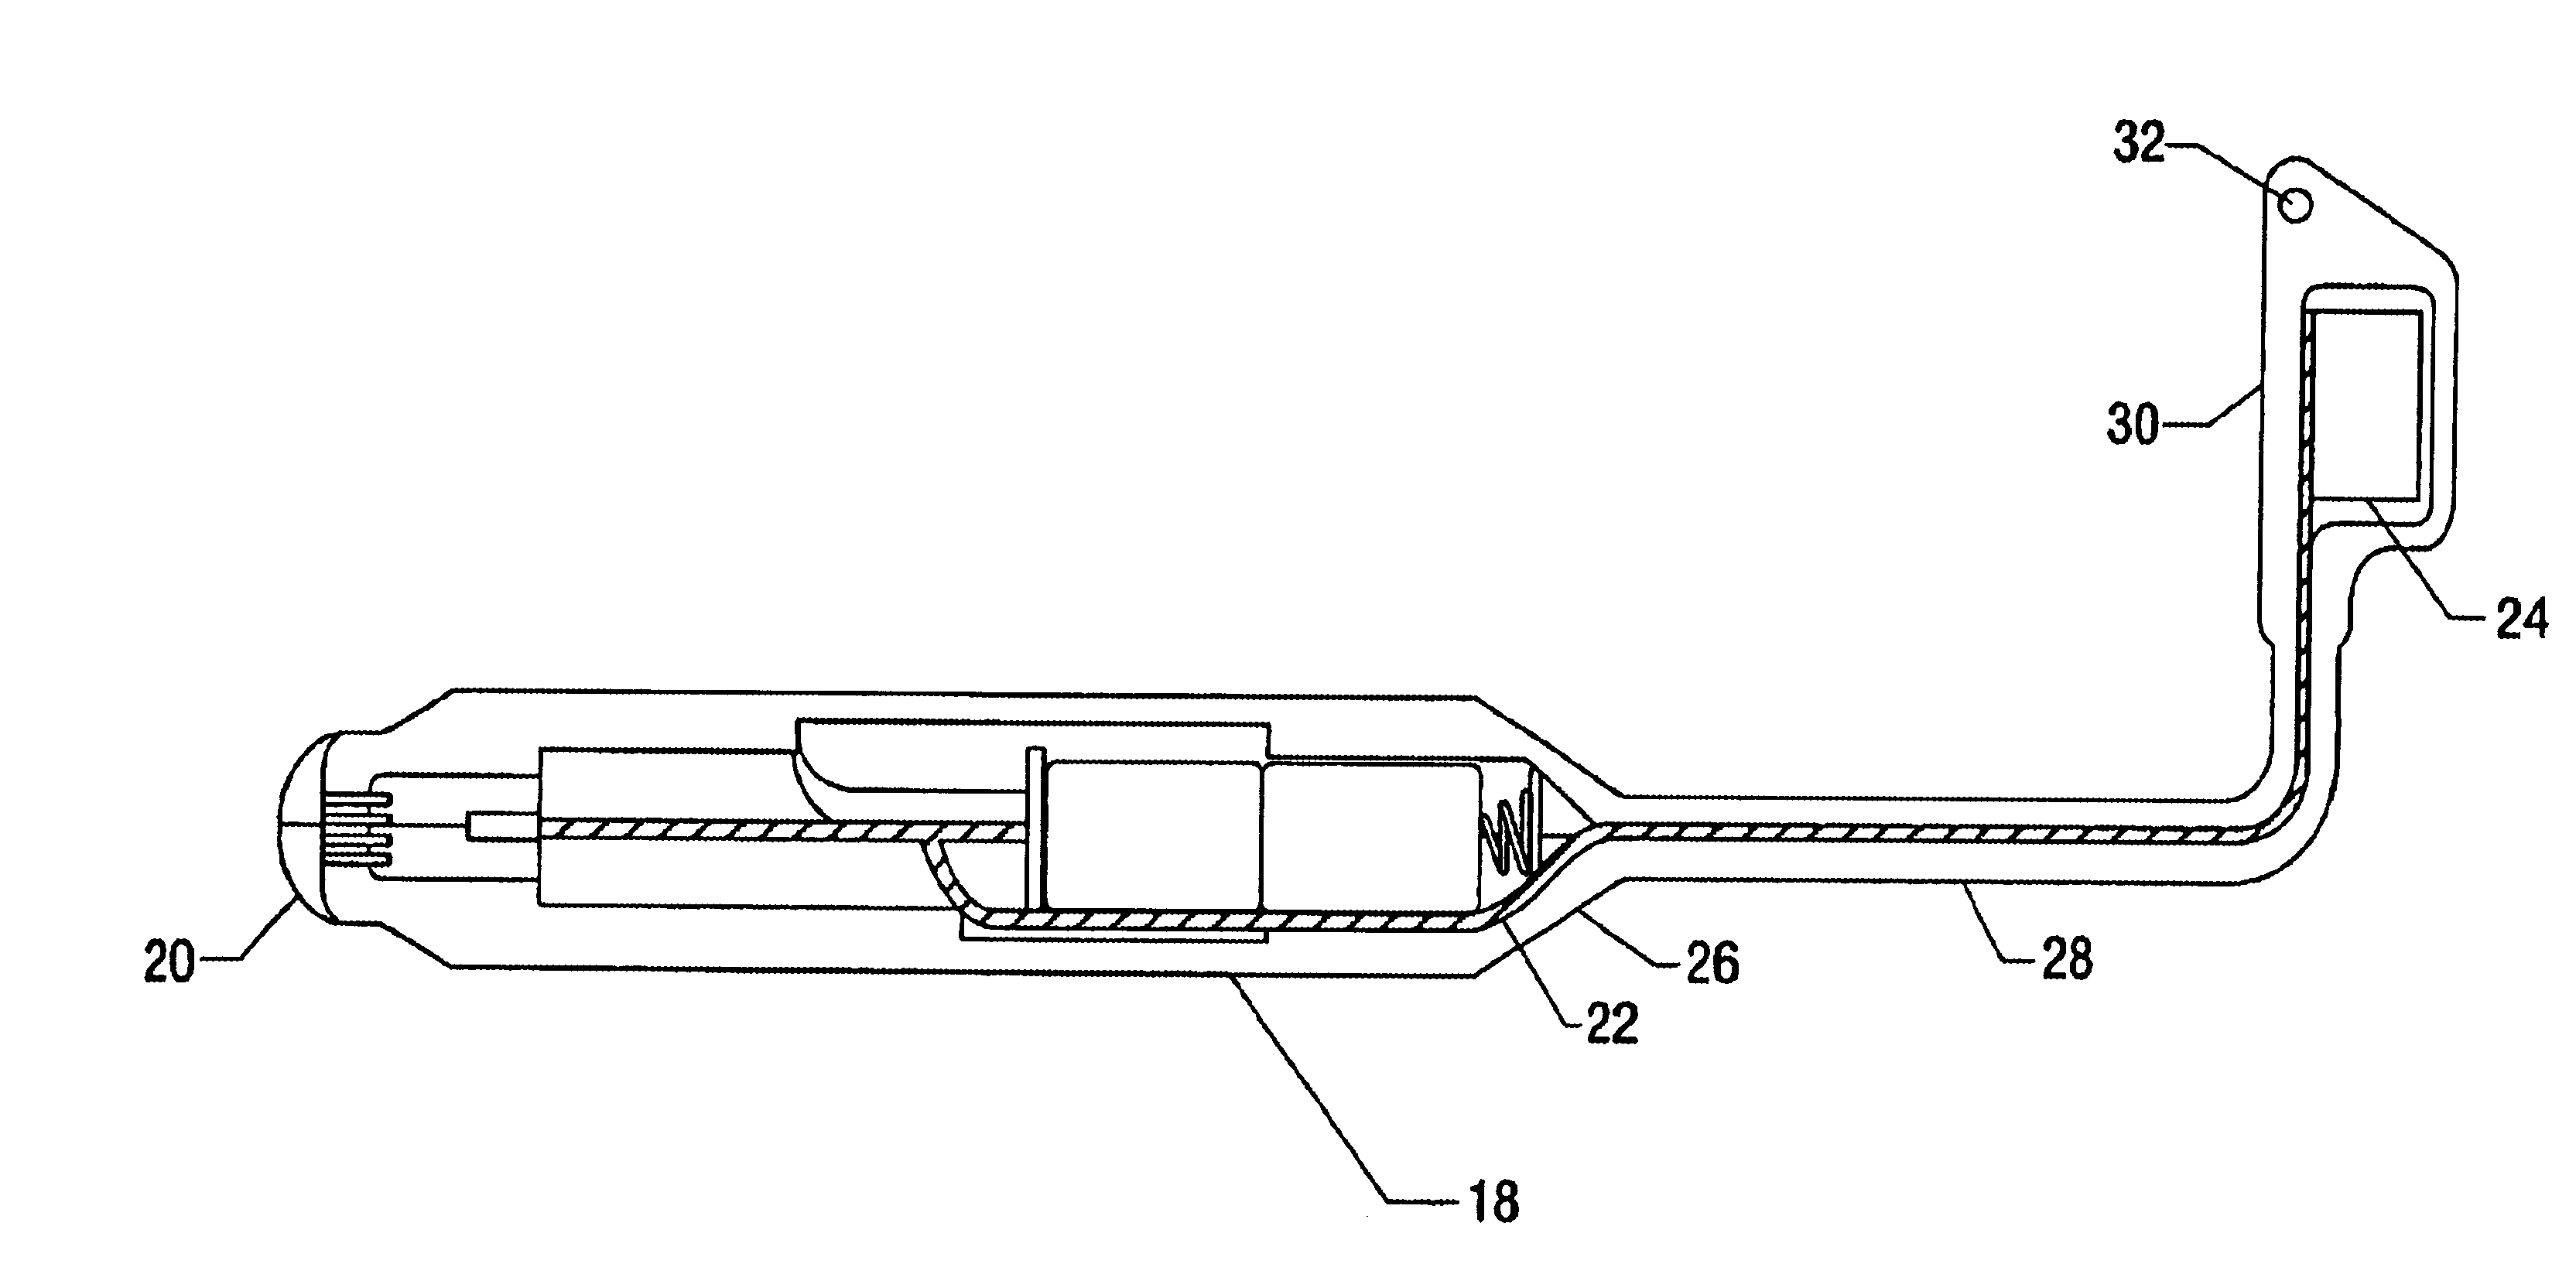 Apparatus and method for detection of estrus and/or non-pregnancy